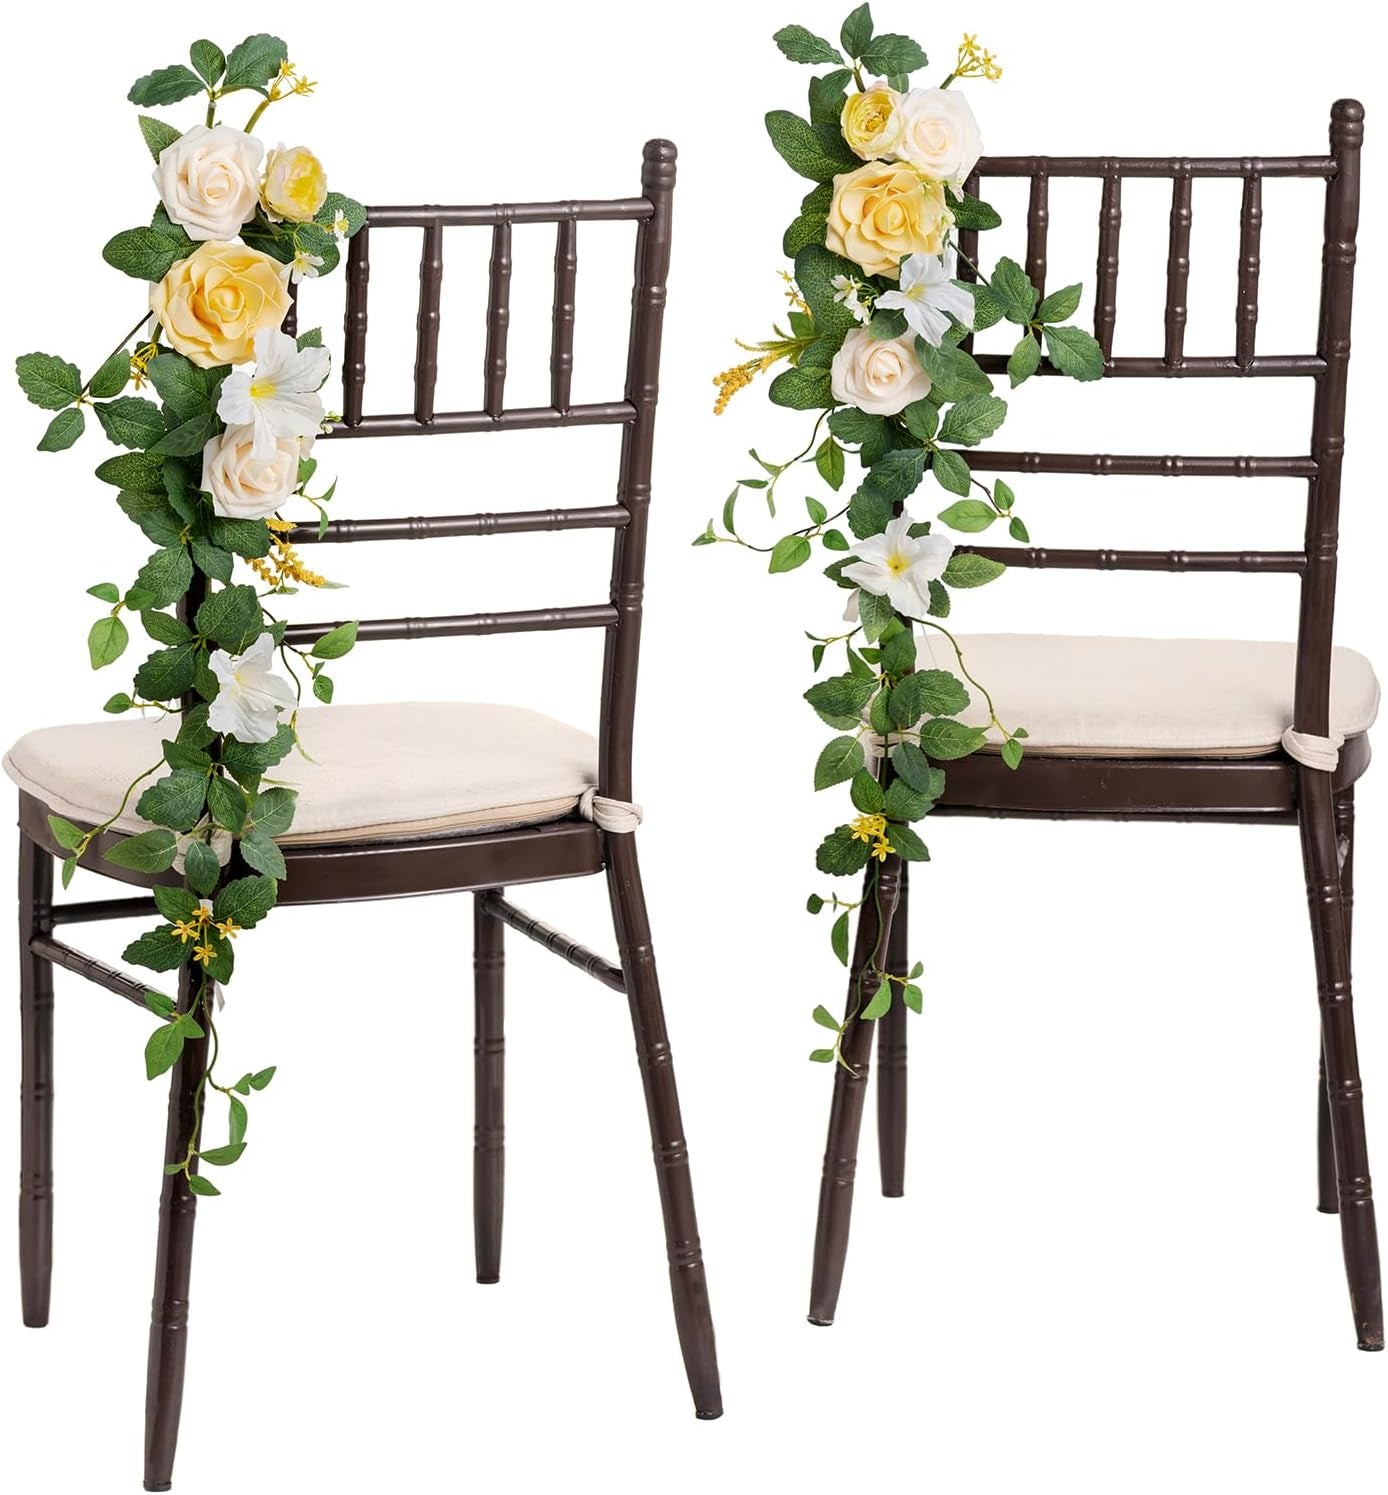 Ling'S Moment 10Pcs Wedding Chair Decorations Aisle Floral Swag Artificial Pew Flowers Hanging Garland White & Sage Green for Ceremony Reception Church Rose Floral Faux Arrangement Party Outdoor Decor